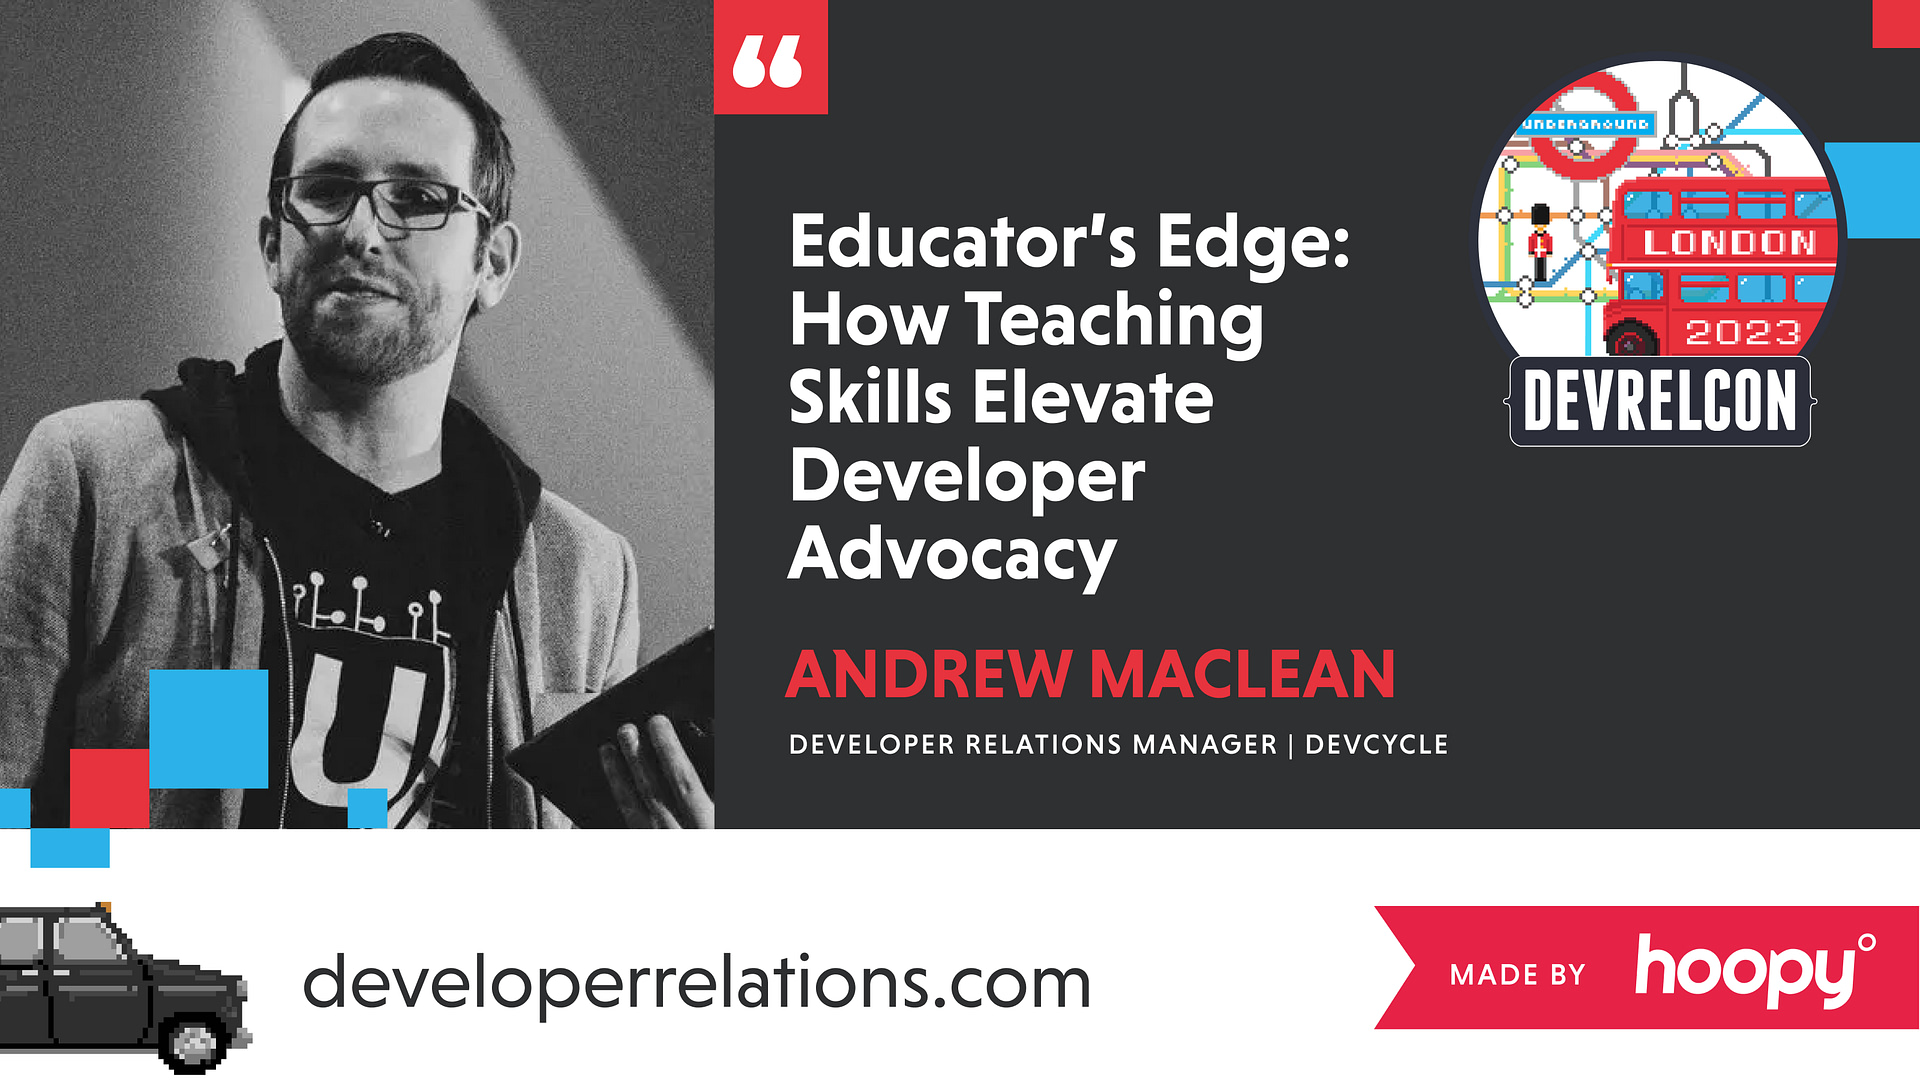 The image is a promotional graphic for a speaking event. On the left, there is a grayscale photo of a man holding a tablet, looking down at it. He is wearing glasses, a hoodie, and a lanyard. To the right, there is red and black text on a white background that reads, "Educator’s Edge: How Teaching Skills Elevate Developer Advocacy" and below in smaller font, "ANDREW MACLEAN DEVELOPER RELATIONS MANAGER | DEVCYCLE". Below the text, there is a red banner with the text "MADE BY hoopy". In the background, there are colorful, abstract shapes on the top and a pixelated black taxi, a red double-decker bus, and part of the London Underground sign at the bottom, indicating the event may be in London. The event is titled "DEVRELCON 2023". The website "developerrelations.com" is at the bottom.